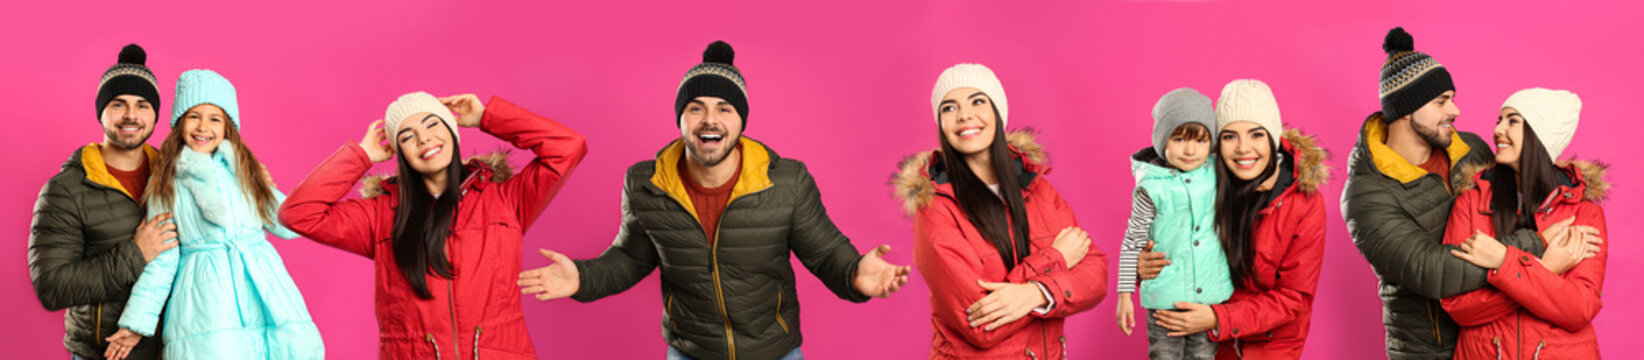 Collage with photos of people wearing warm clothes on pink background, banner design. Winter vacation